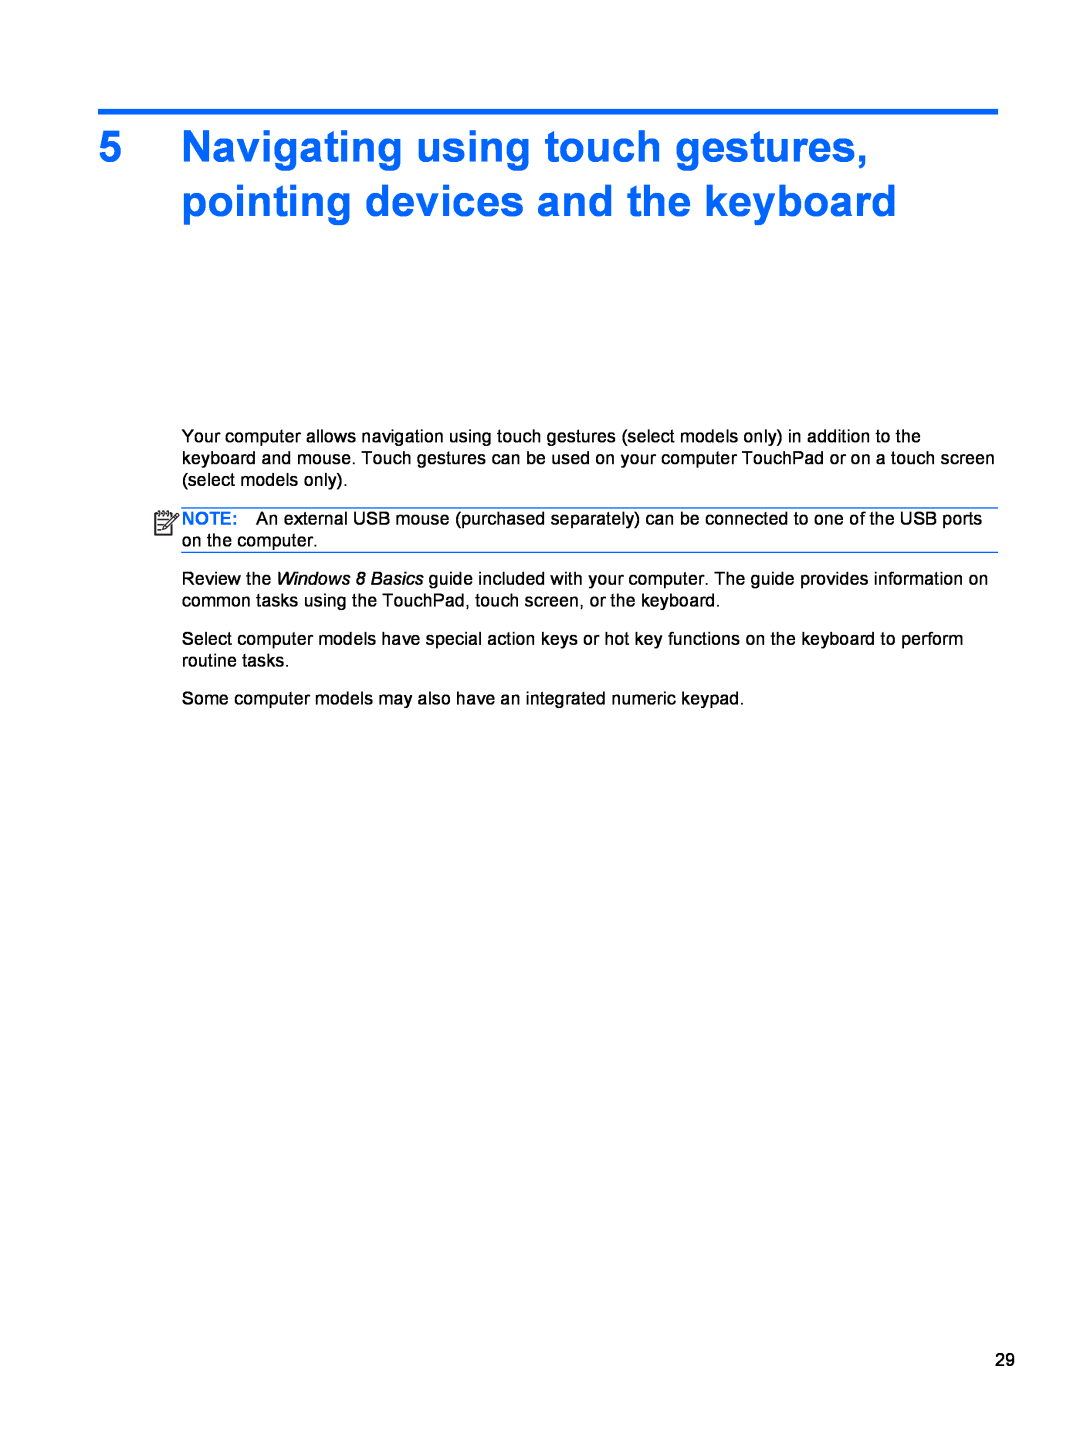 HP C7S02UA#ABA, C2M17UA#ABA, C2L36UA#ABA manual Navigating using touch gestures, pointing devices and the keyboard 